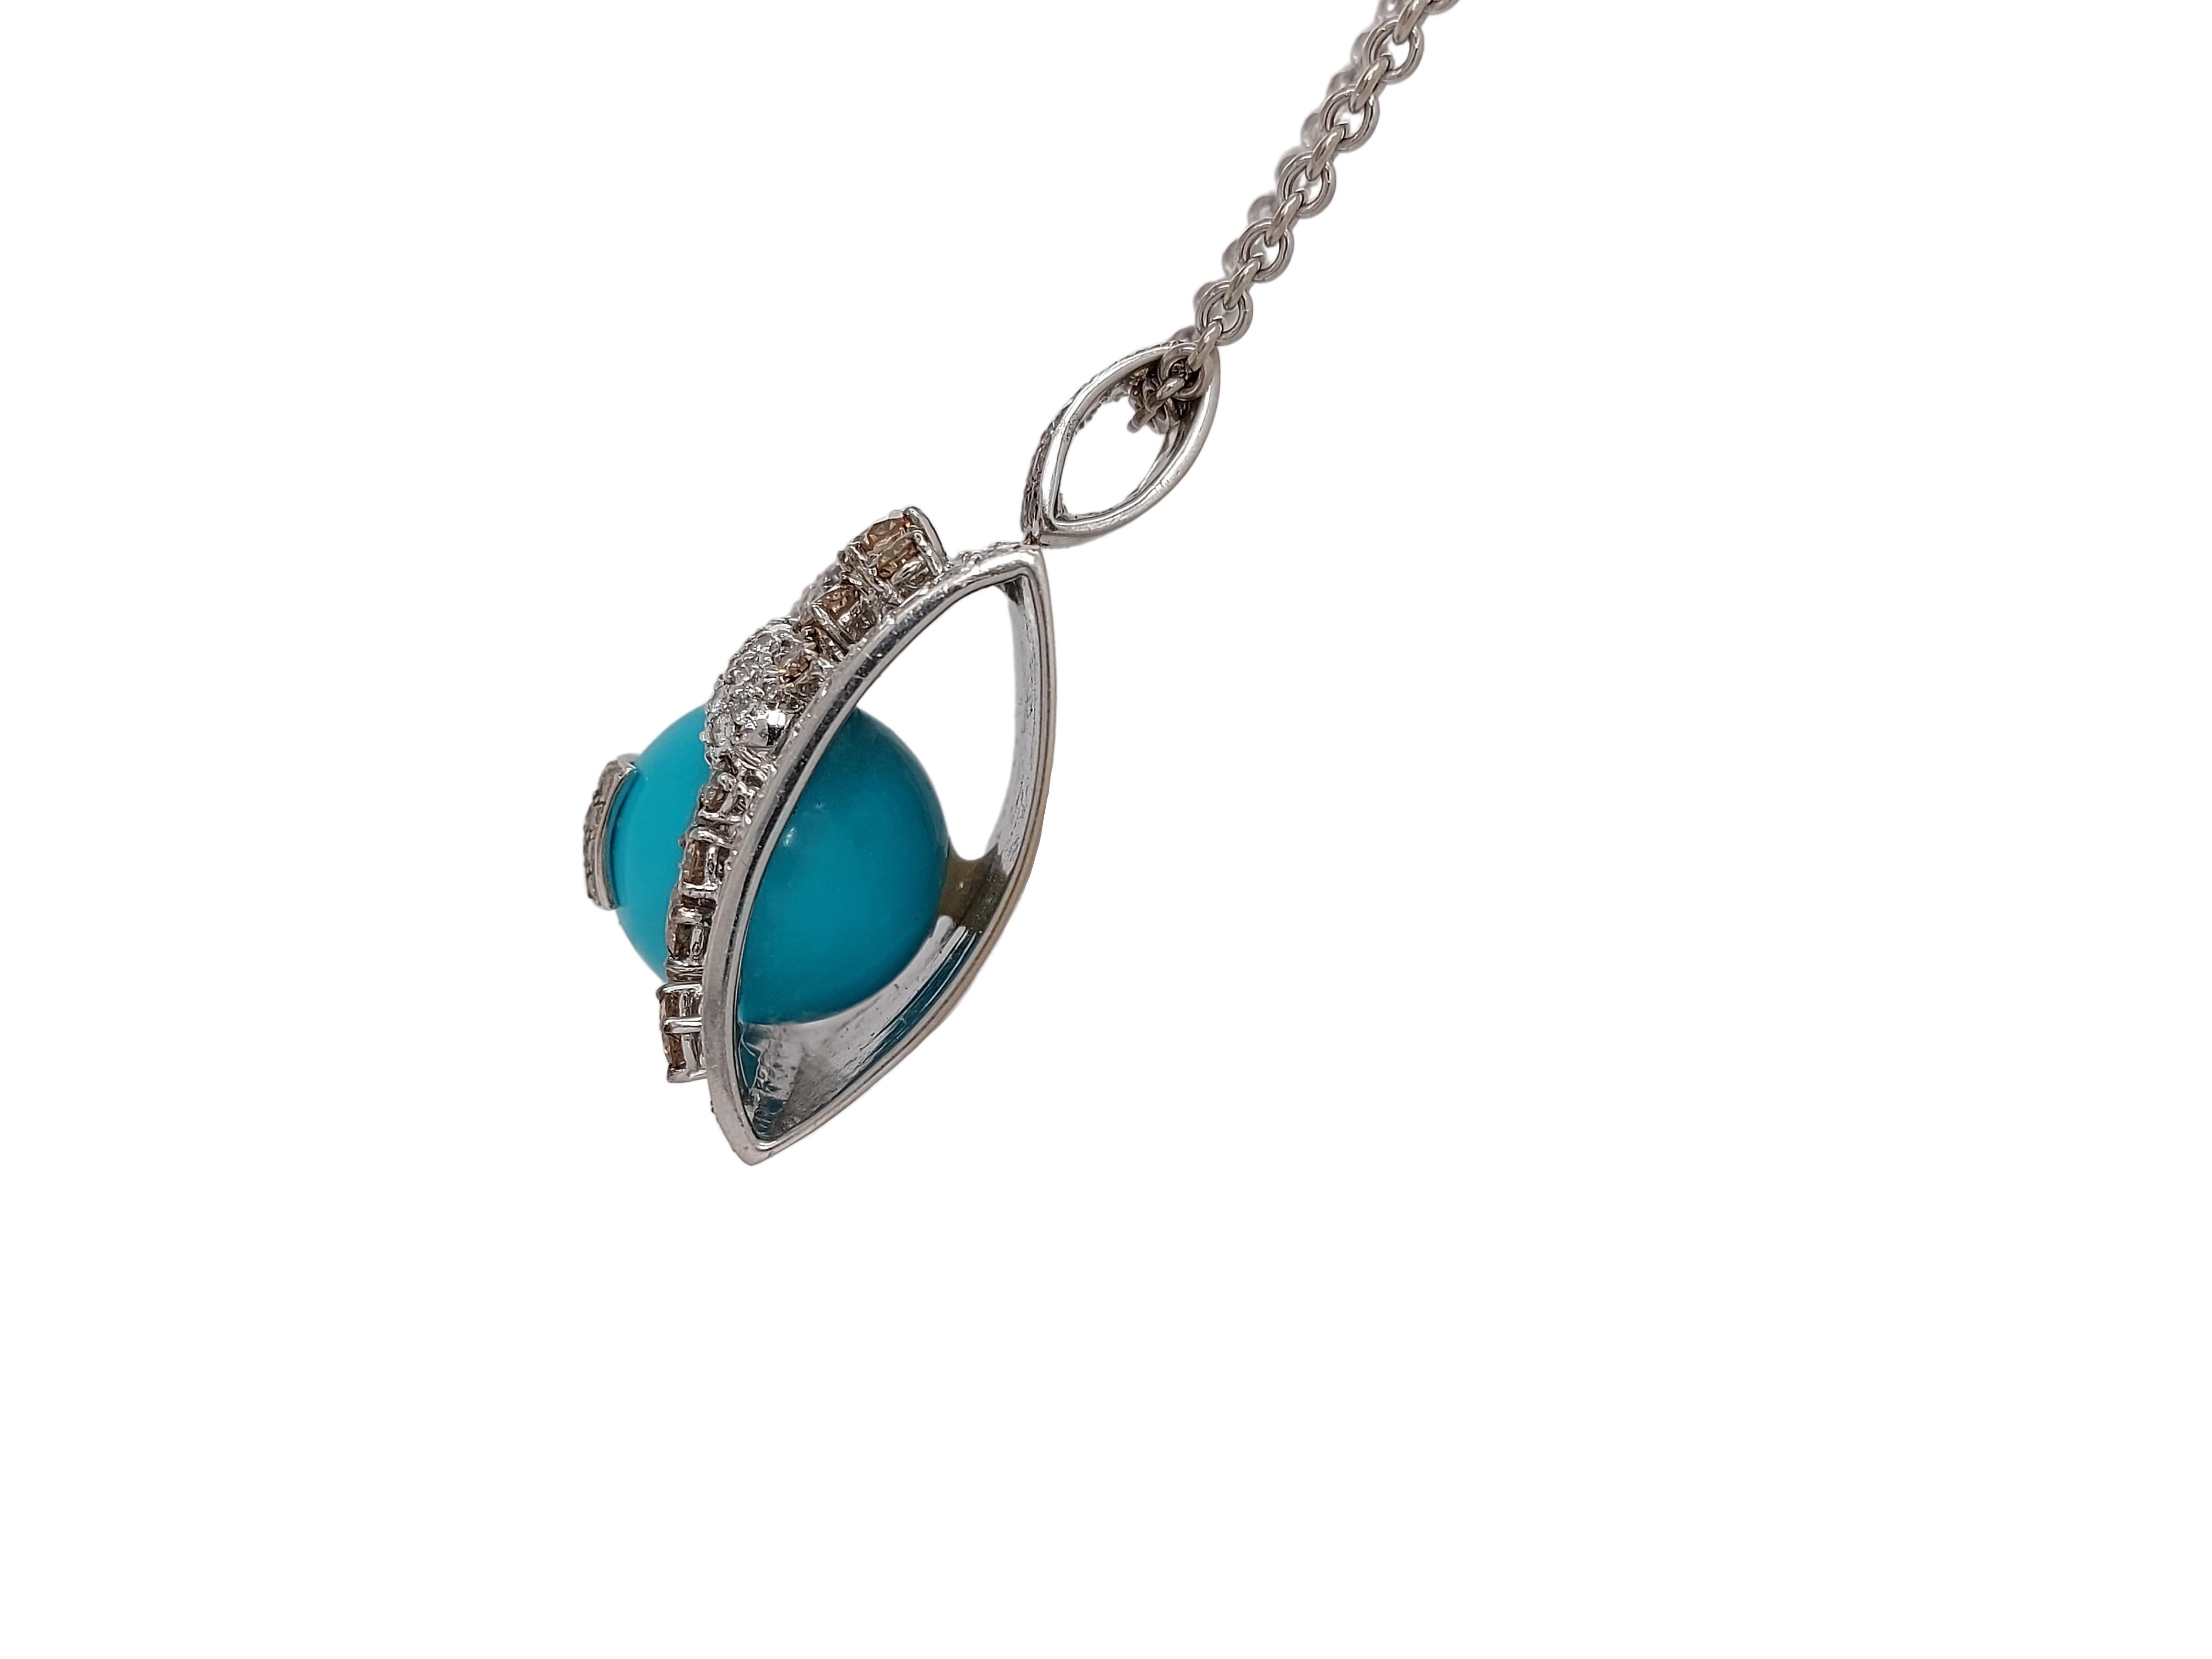 Stunning 18kt White Gold Pendant / Necklace with Turquoise and Diamonds 6